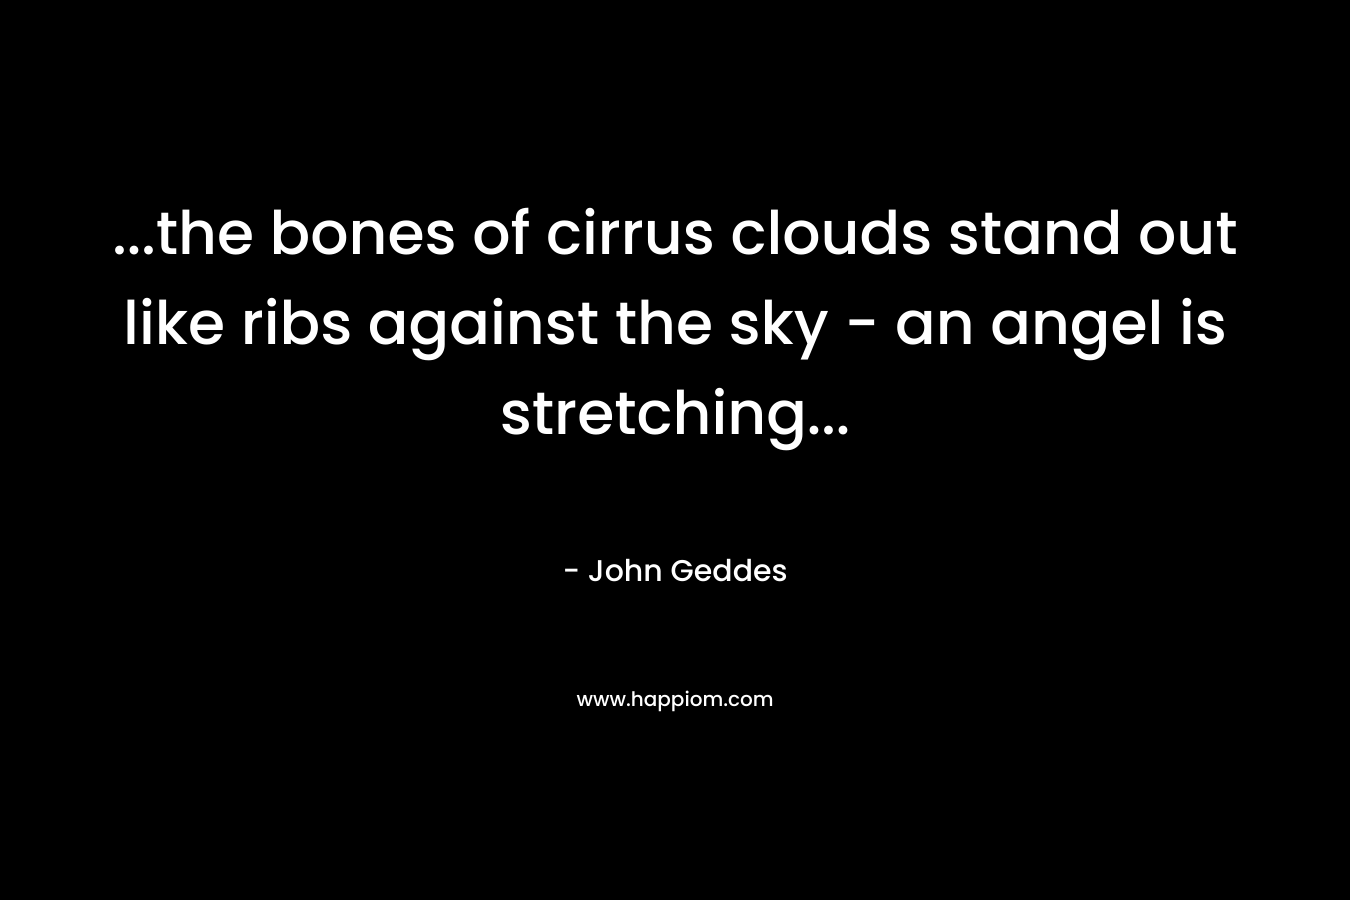 …the bones of cirrus clouds stand out like ribs against the sky – an angel is stretching… – John Geddes